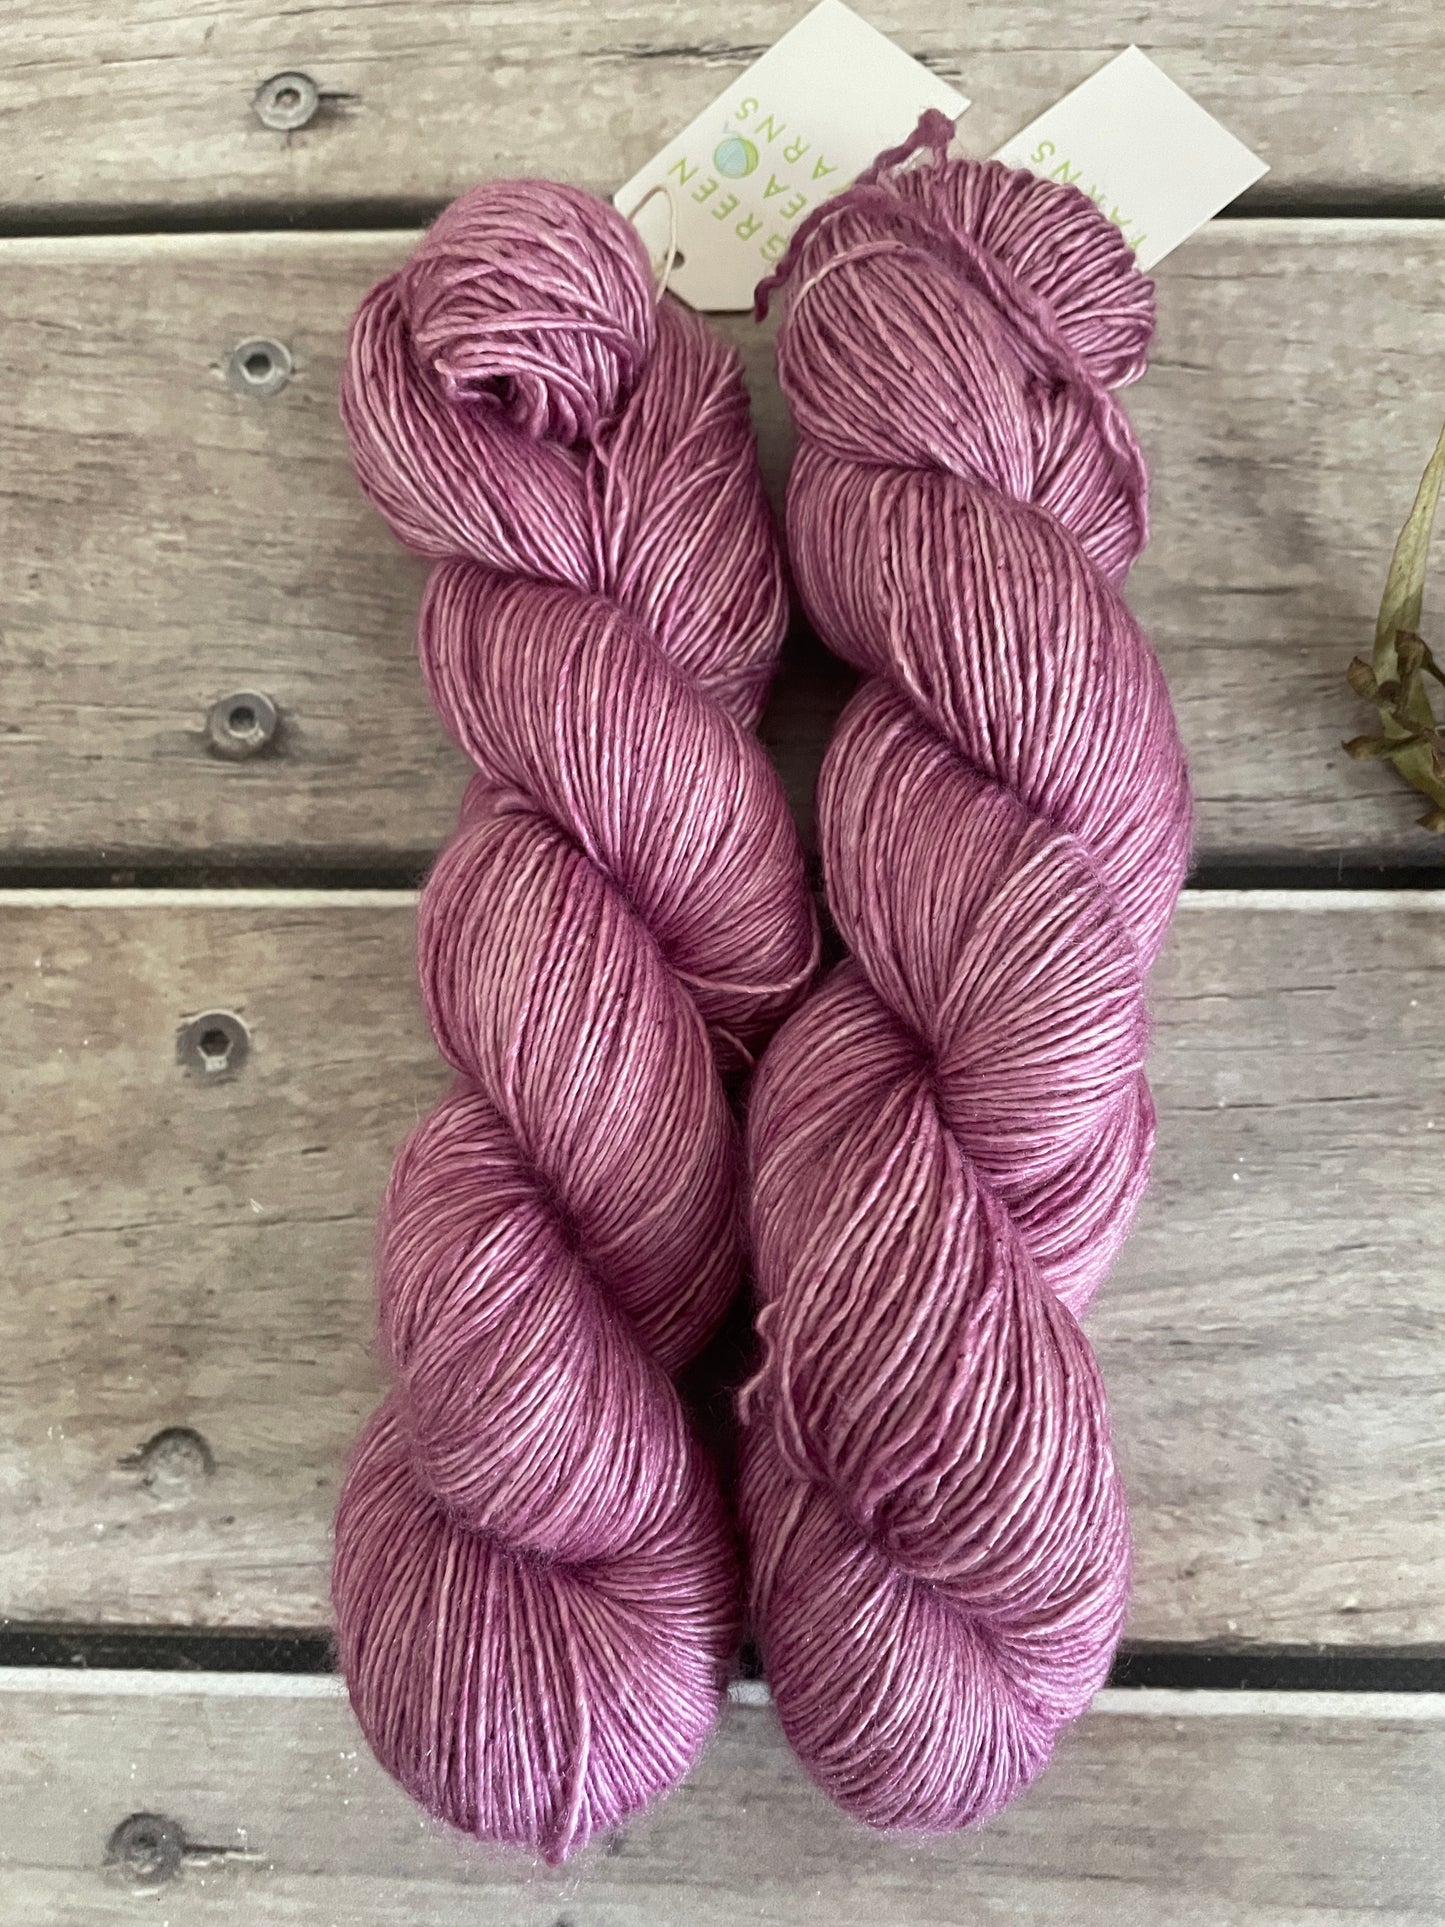 Tea Rose - 4 ply in Mulberry silk and Merino singles yarn - Osmanthus